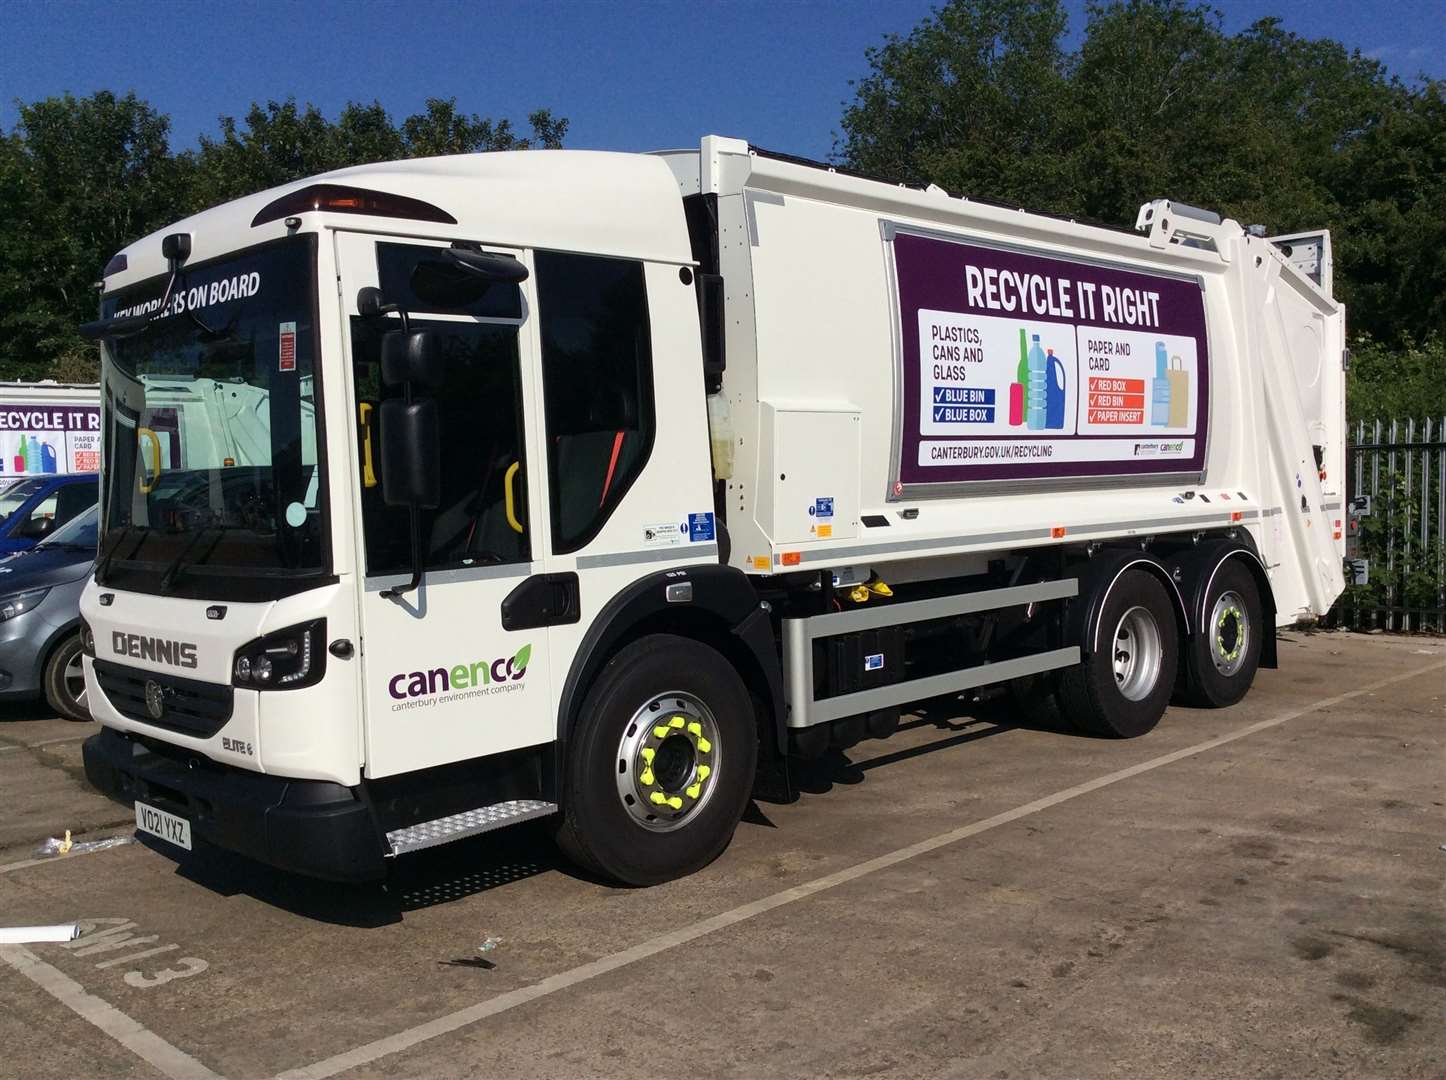 The high tech new bin lorries are going into service